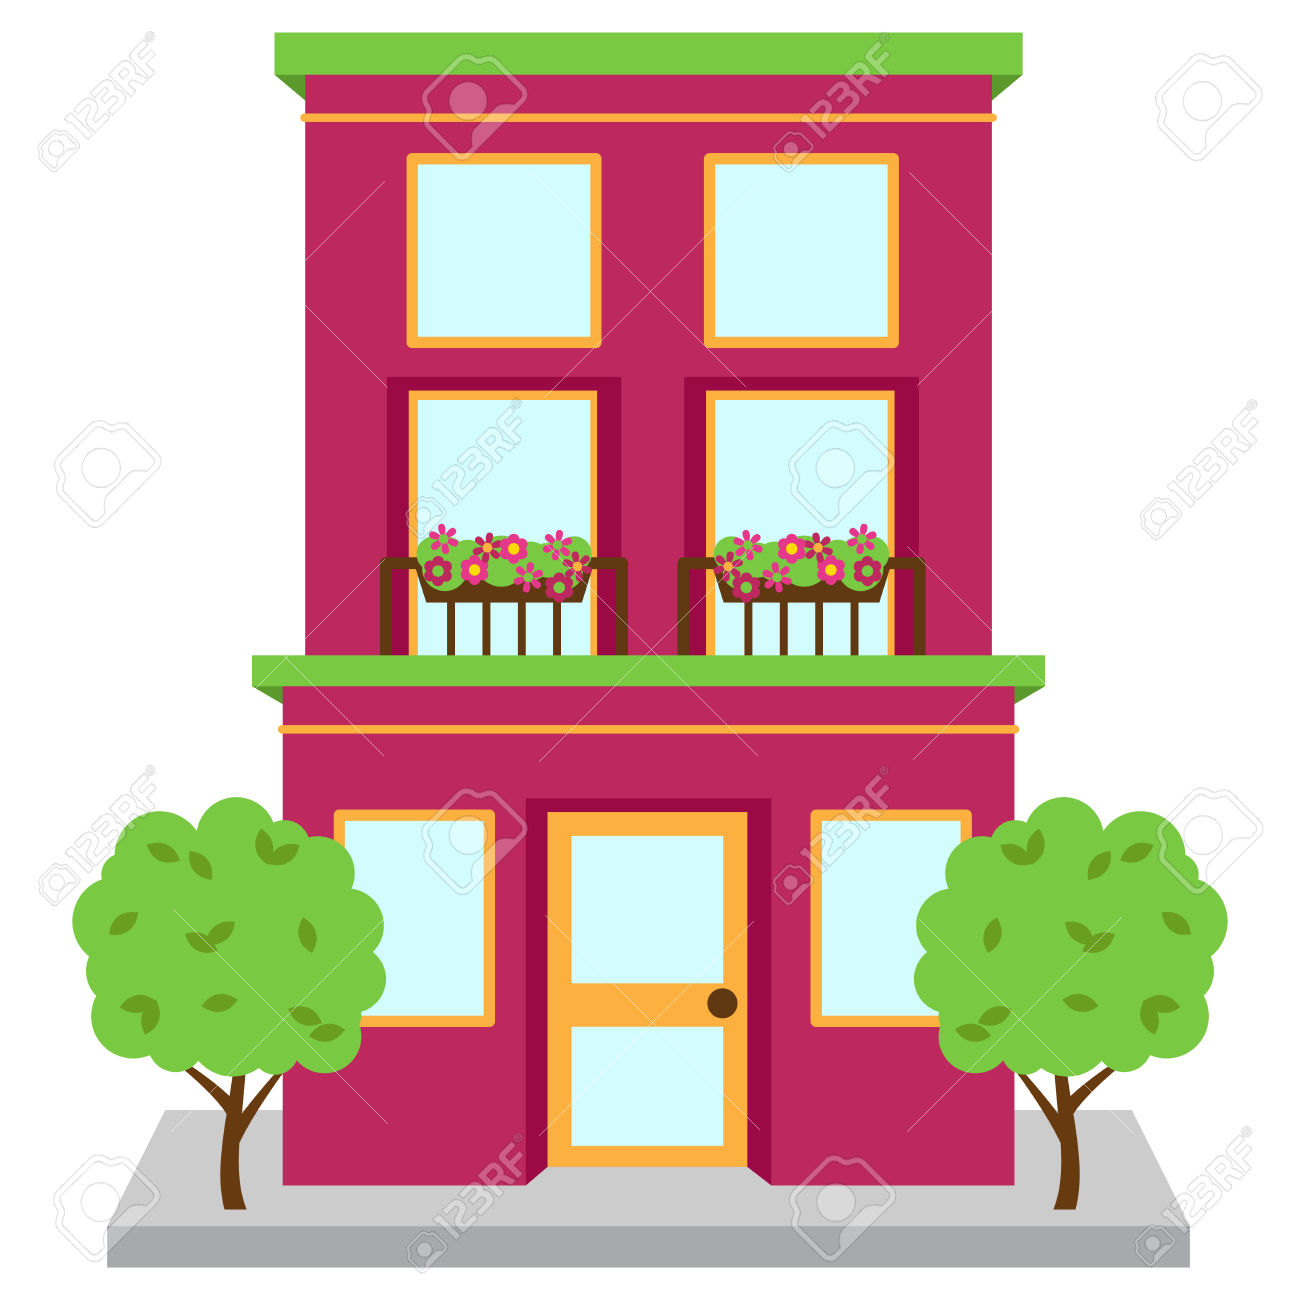 Apartment clipart cute.  collection of house